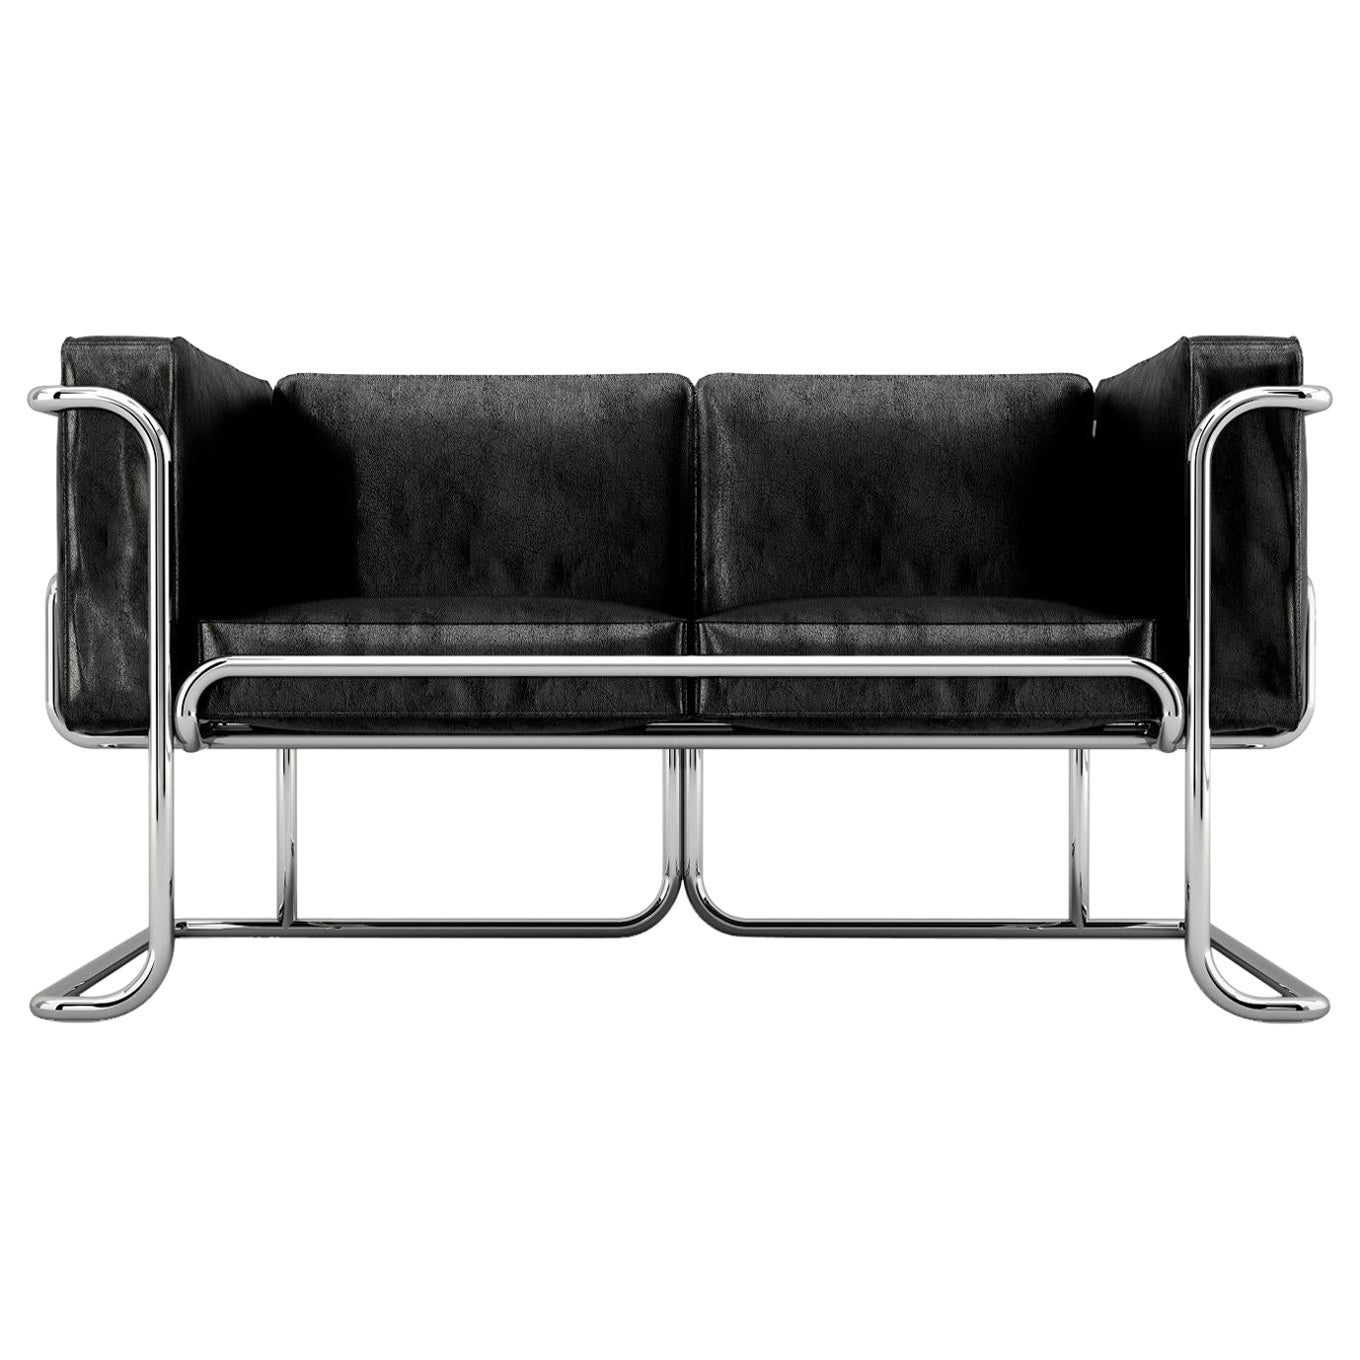 Lotus 2 Seat Sofa - Modern Black Leather Sofa with Stainless Steel Legs For Sale